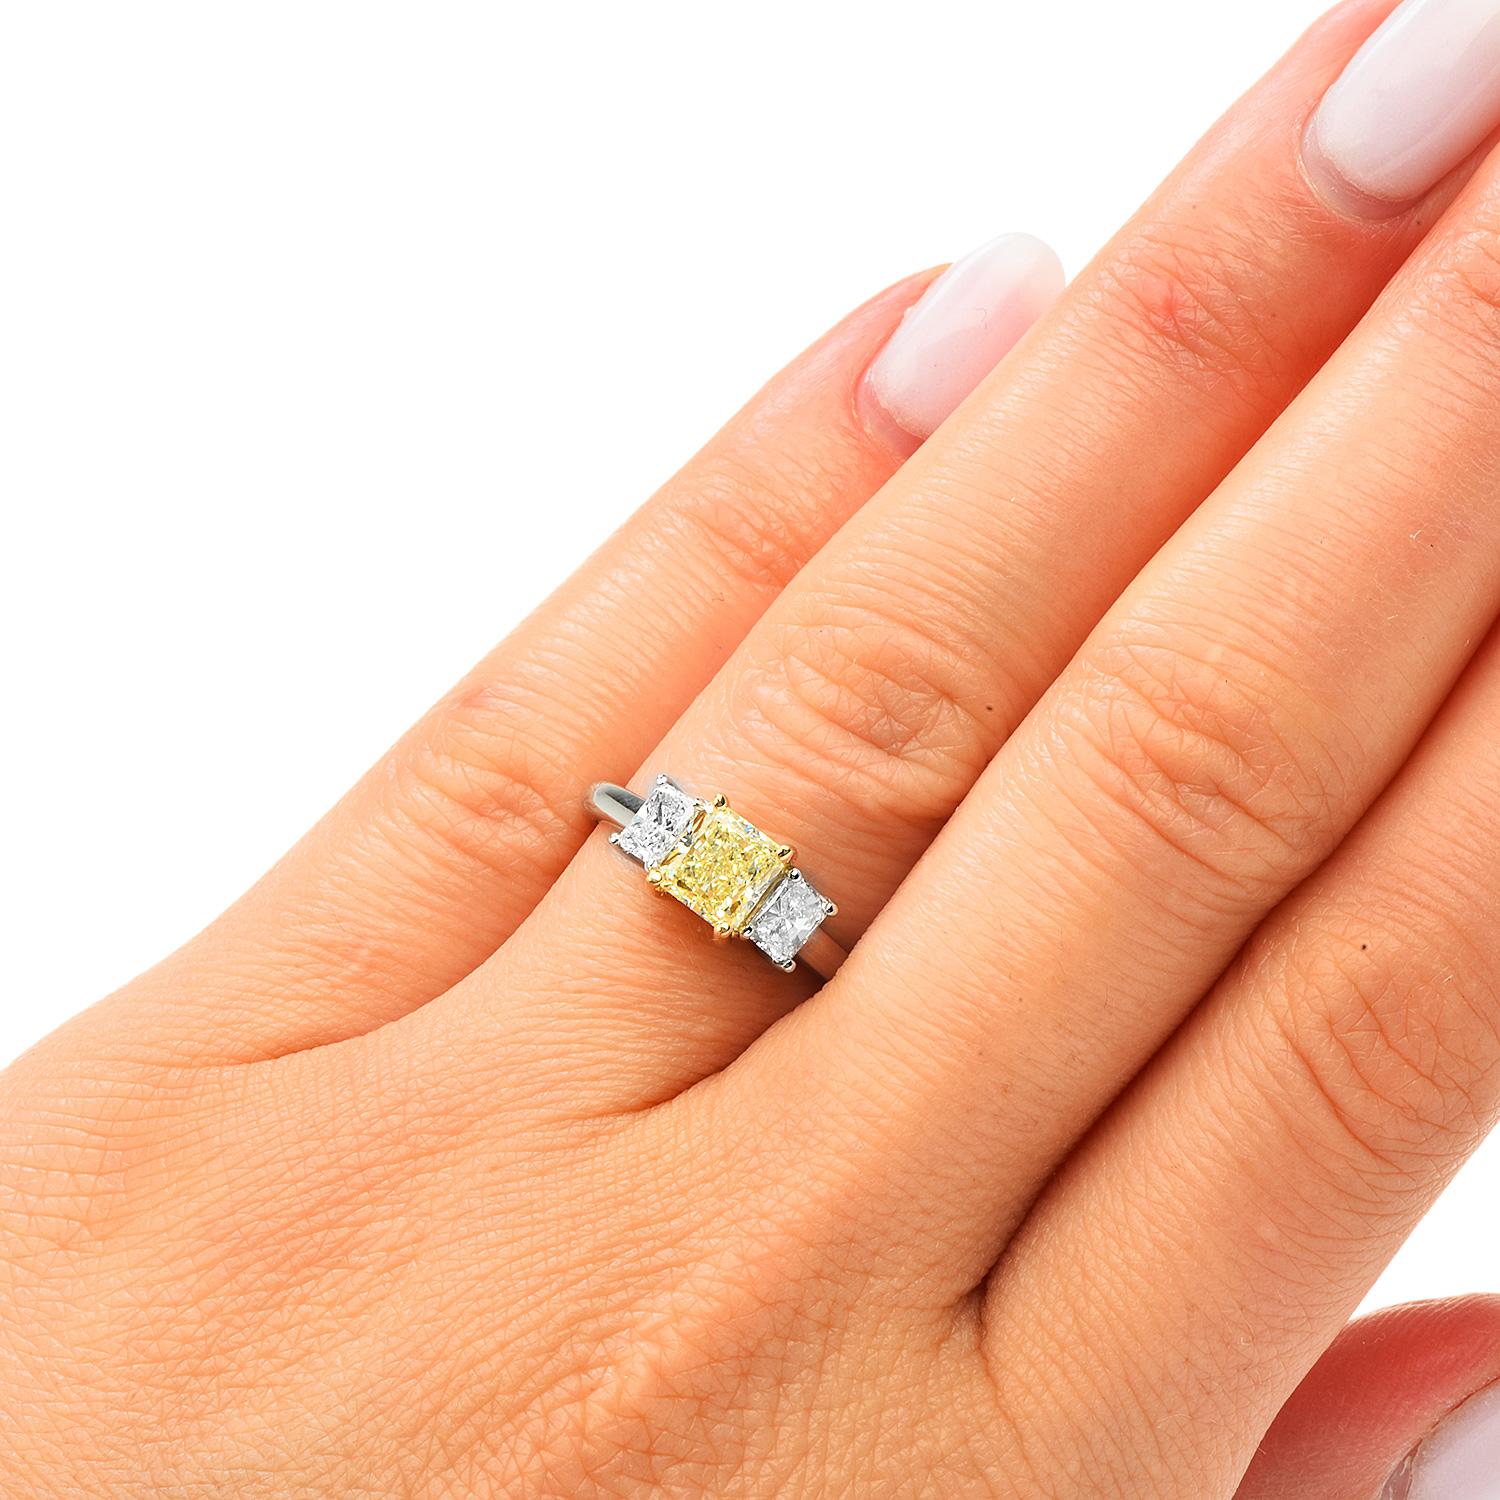 Vibrant Elegance &  sparkle.

Expertly crafted in solid Platinum, composed by exquisite GIA Certified Princess Cut Diamond 1.11 carats, natural W-X yellow color, VS1 Clarity), held by 18K Yellow Gold Prongs.

Complimented by two elongated